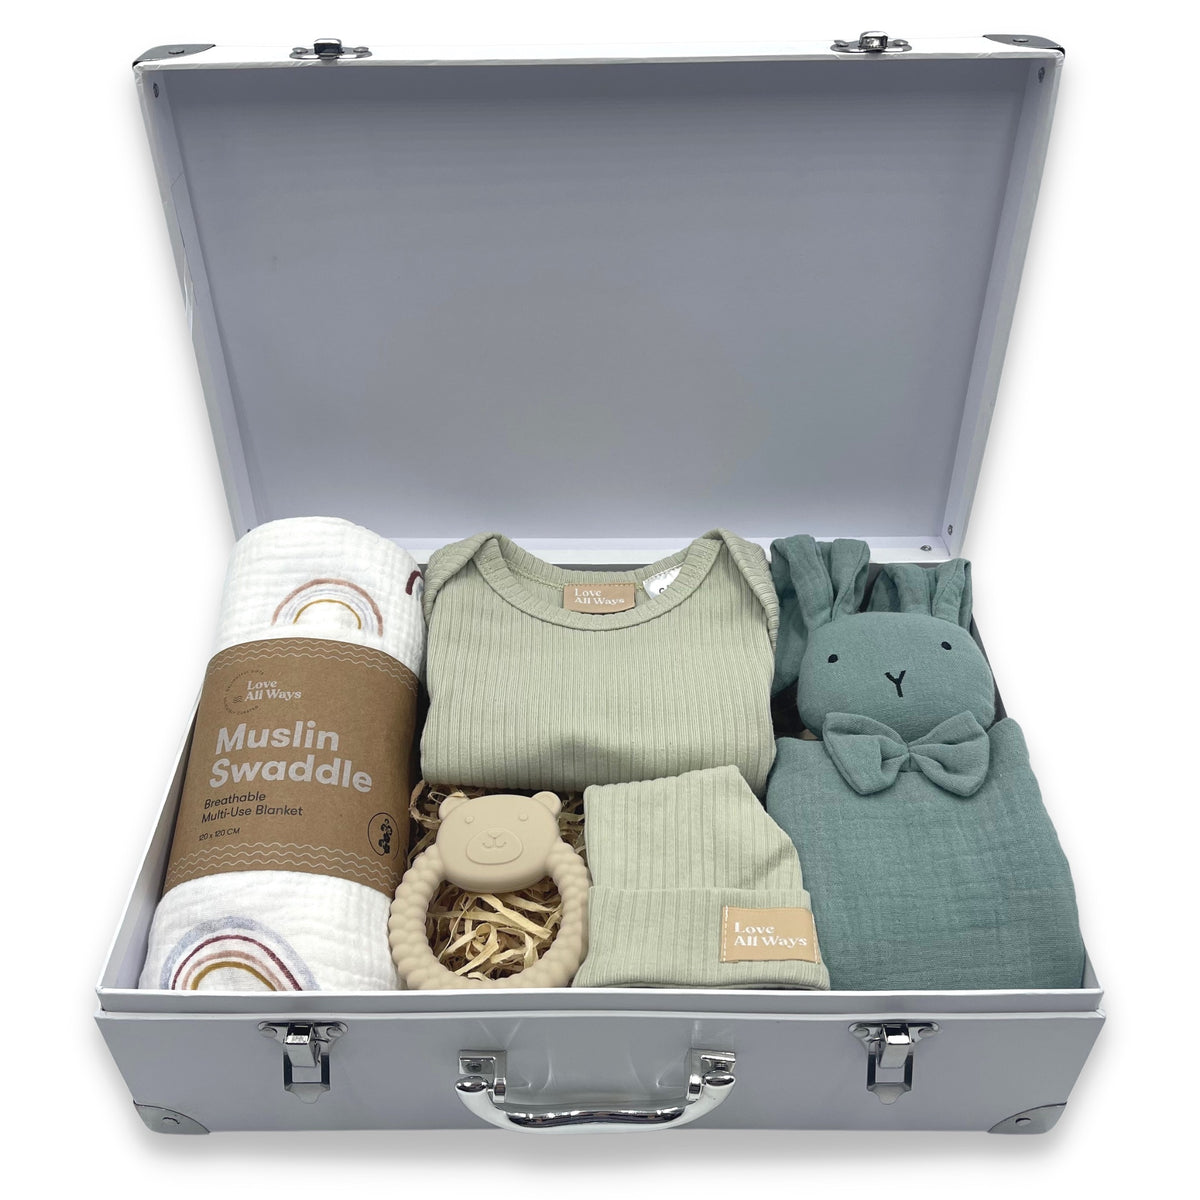 Organic neutral baby gift hamper delivered free AUS wide or great baby shower gift. Celebrate a new birth with this delightfully pieced together idea for someone special.